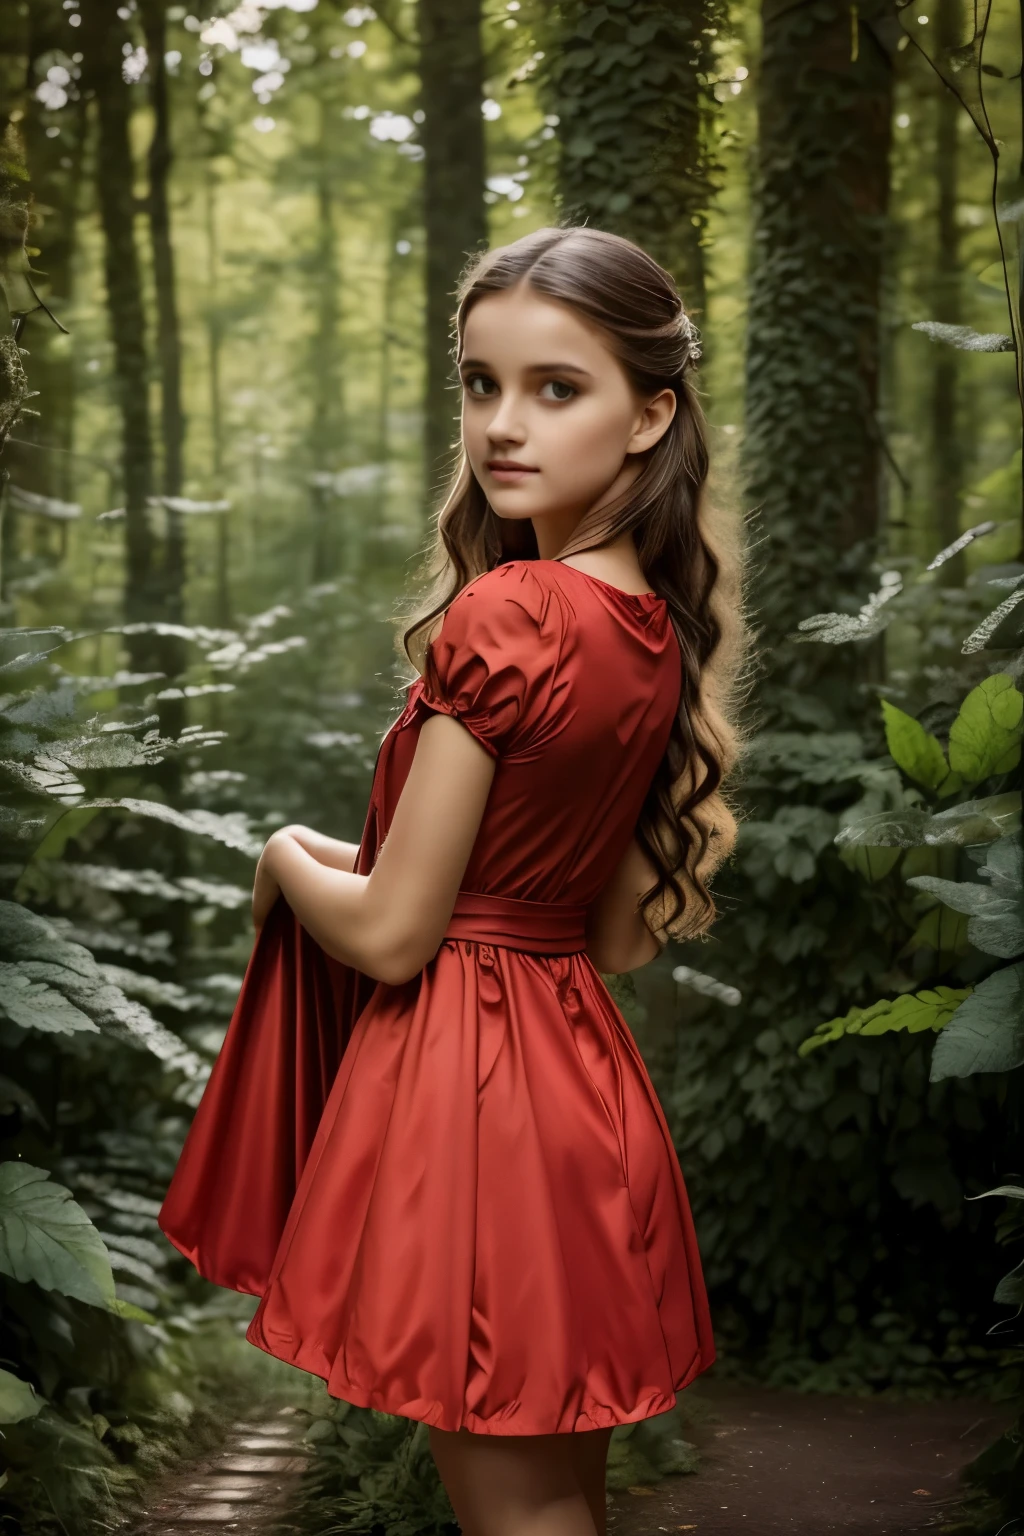 best quality,ultra-detailed,photorealistic,beautiful girl in a garden,traditional oil painting,red cape flowing in the wind,deep green grass and tall trees,sunlight filtering through the leaves,enchanted forest,detailed eyes and face,innocent expression,long wavy hair,basket filled with fruits and flowers,gentle smile,warm color palette,soft lighting, and big bad wolf hiding behind trees,mysterious atmosphere,storybook illustration,lush foliage,ethereal beauty,soft textures,dramatic shadows,fairy tale,adventure and danger,classic literature,magical encounter, exploring the unknown,curiosity,prominent eyes,portraits,mythical creature,suspenseful moment,exciting journey,innocence and bravery,contrast between light and dark,hidden dangers,whispering wind and rustling leaves,adding a touch of surrealism, path leading deeper into the forest,quiet and tranquil setting,enchanted garden,contrast between the girl's red cloak and the green surroundings,contrast between the girl's soft features and the wolf's fierce expression,captivating and compelling imagery.